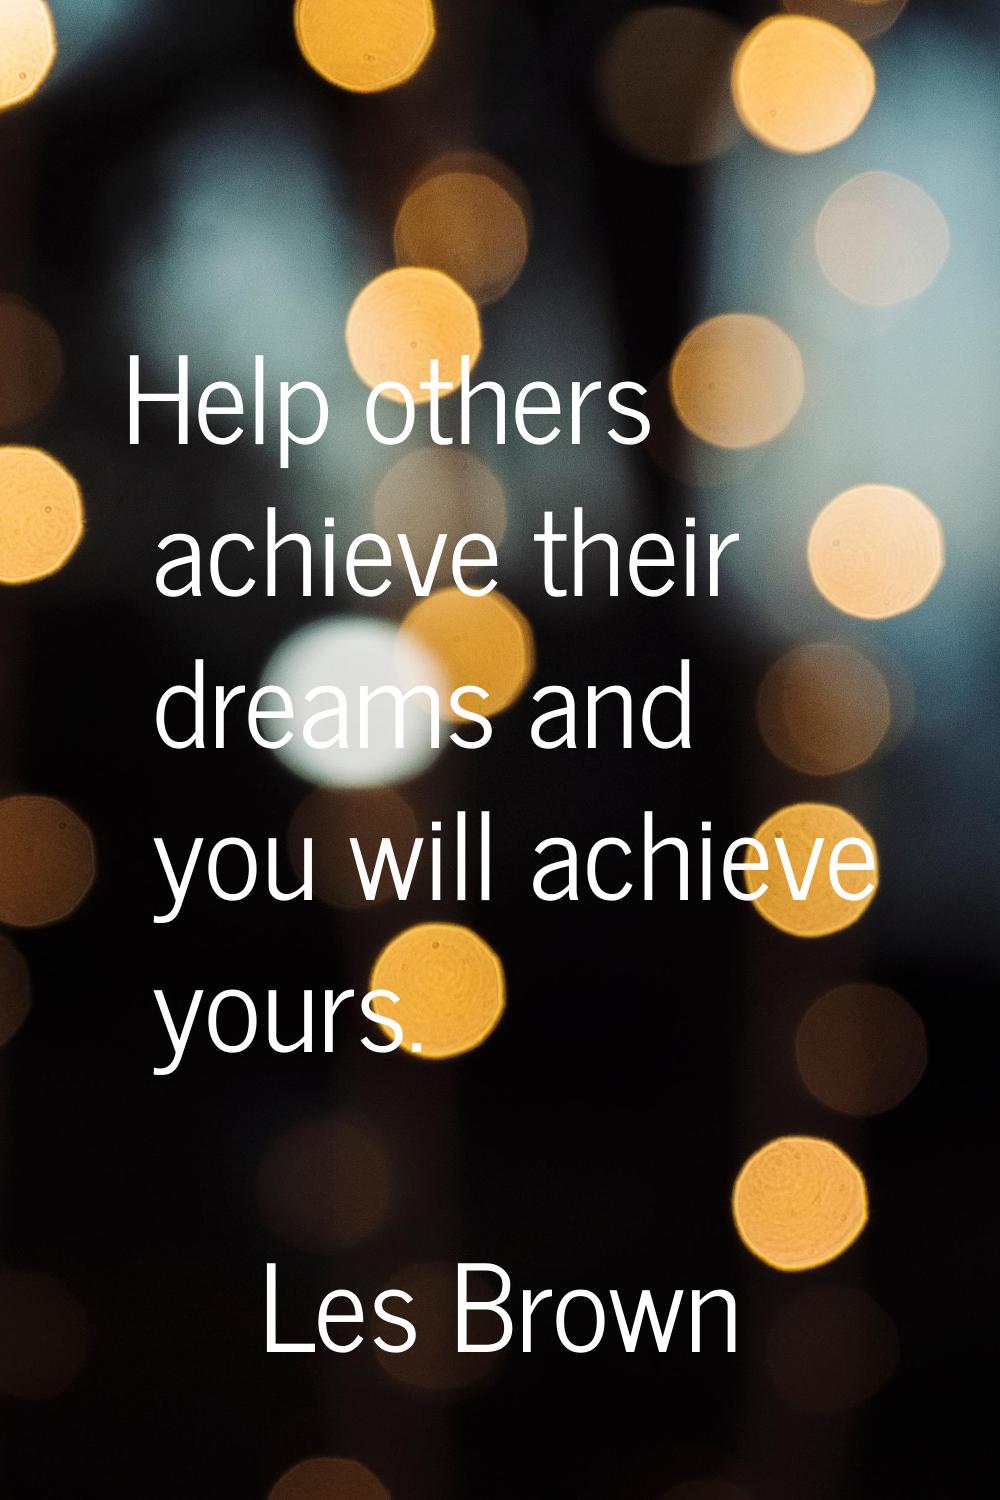 Help others achieve their dreams and you will achieve yours.